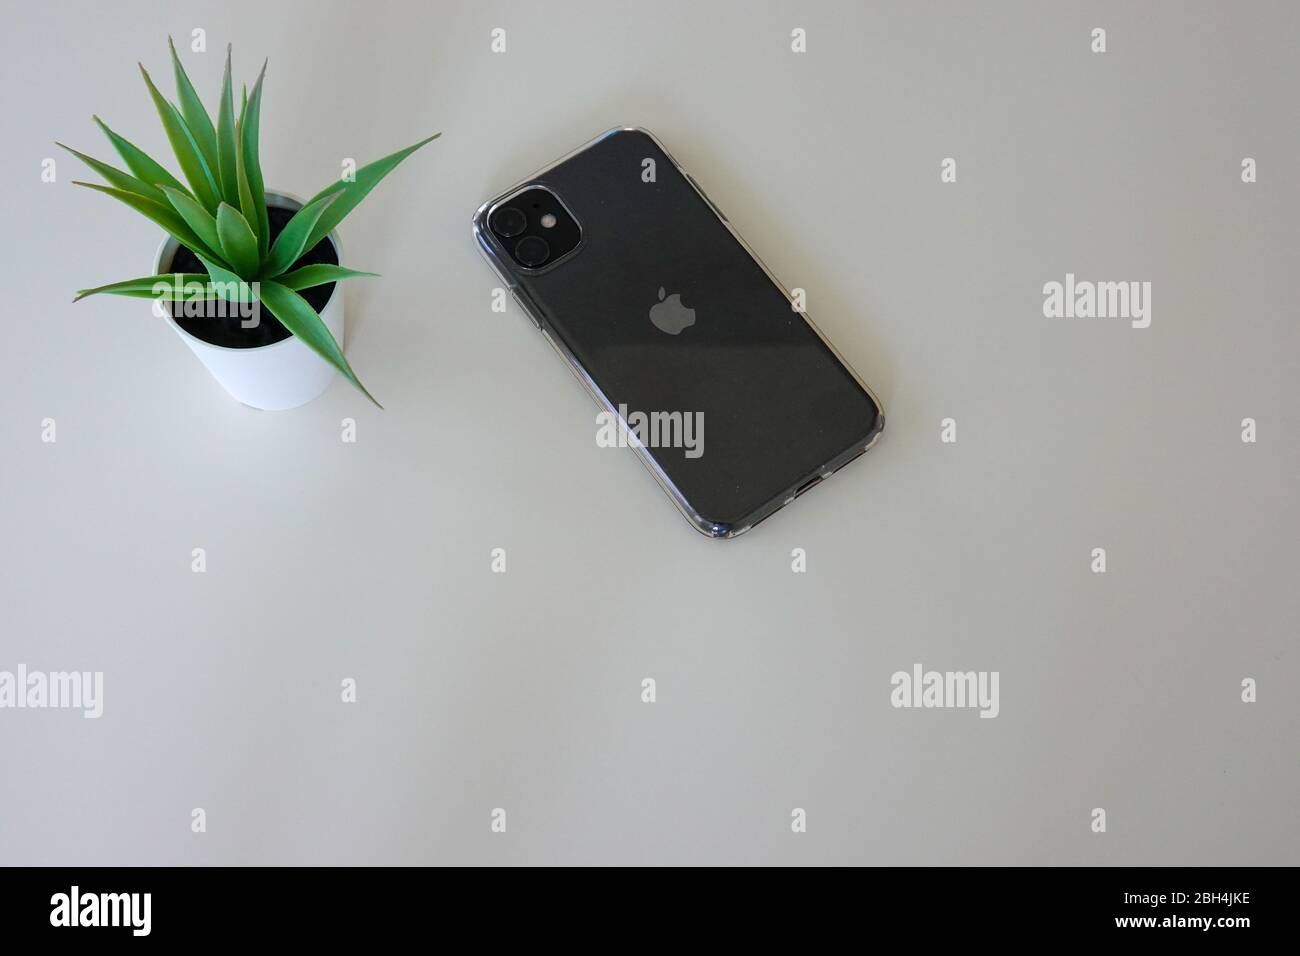 Orlando,FL/USA-4/1/20:  An Apple iPhone 11 smartphone laying on a white background. Stock Photo